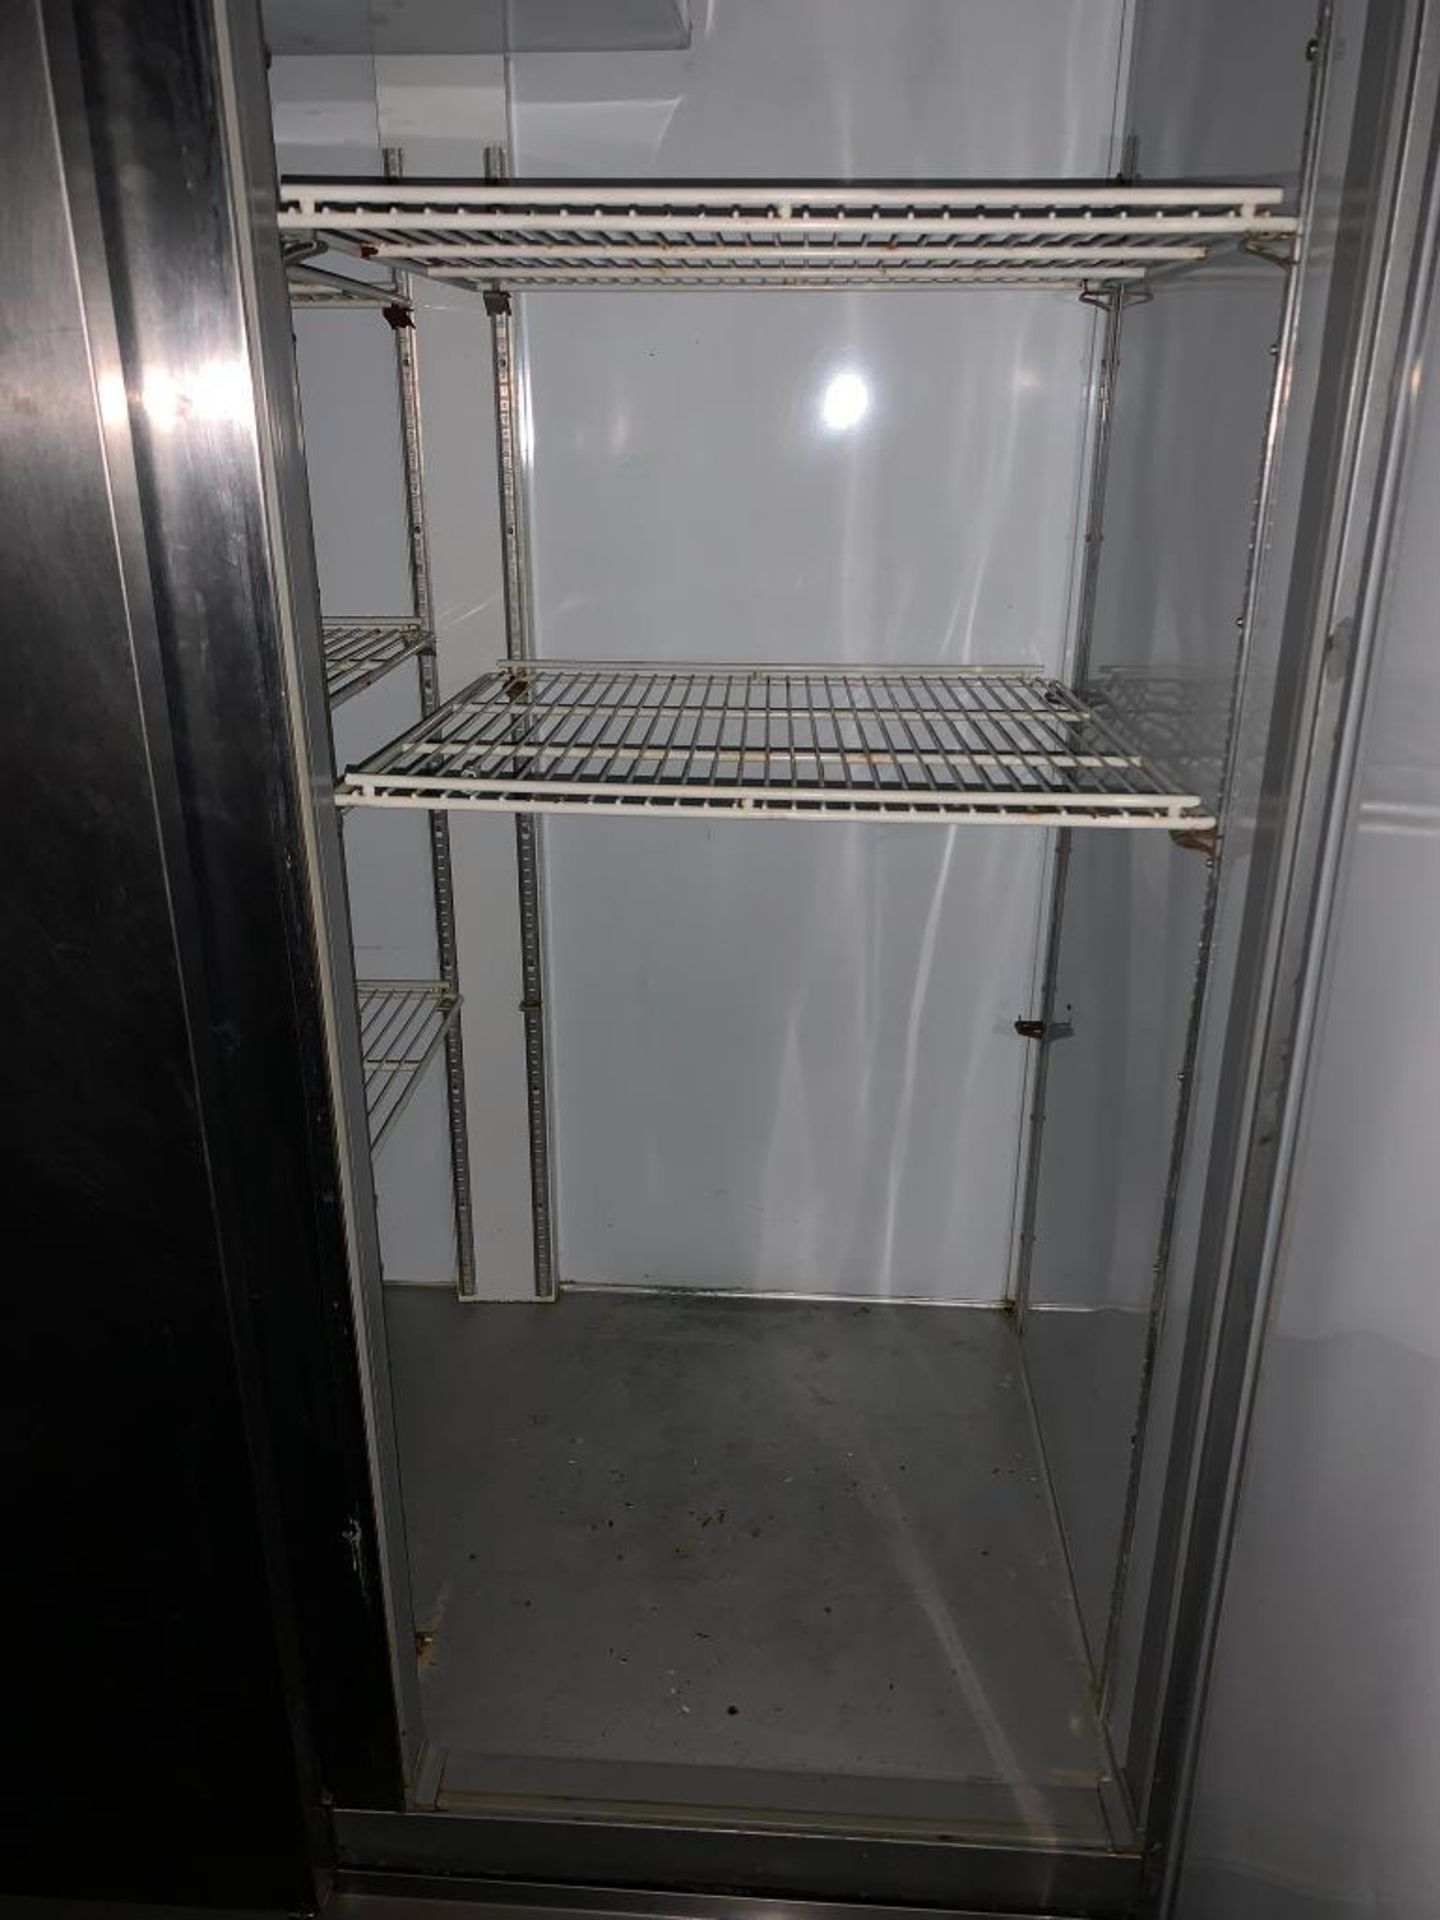 Beverage Air Stainless Steel Commercial Refrigerator - Image 4 of 4